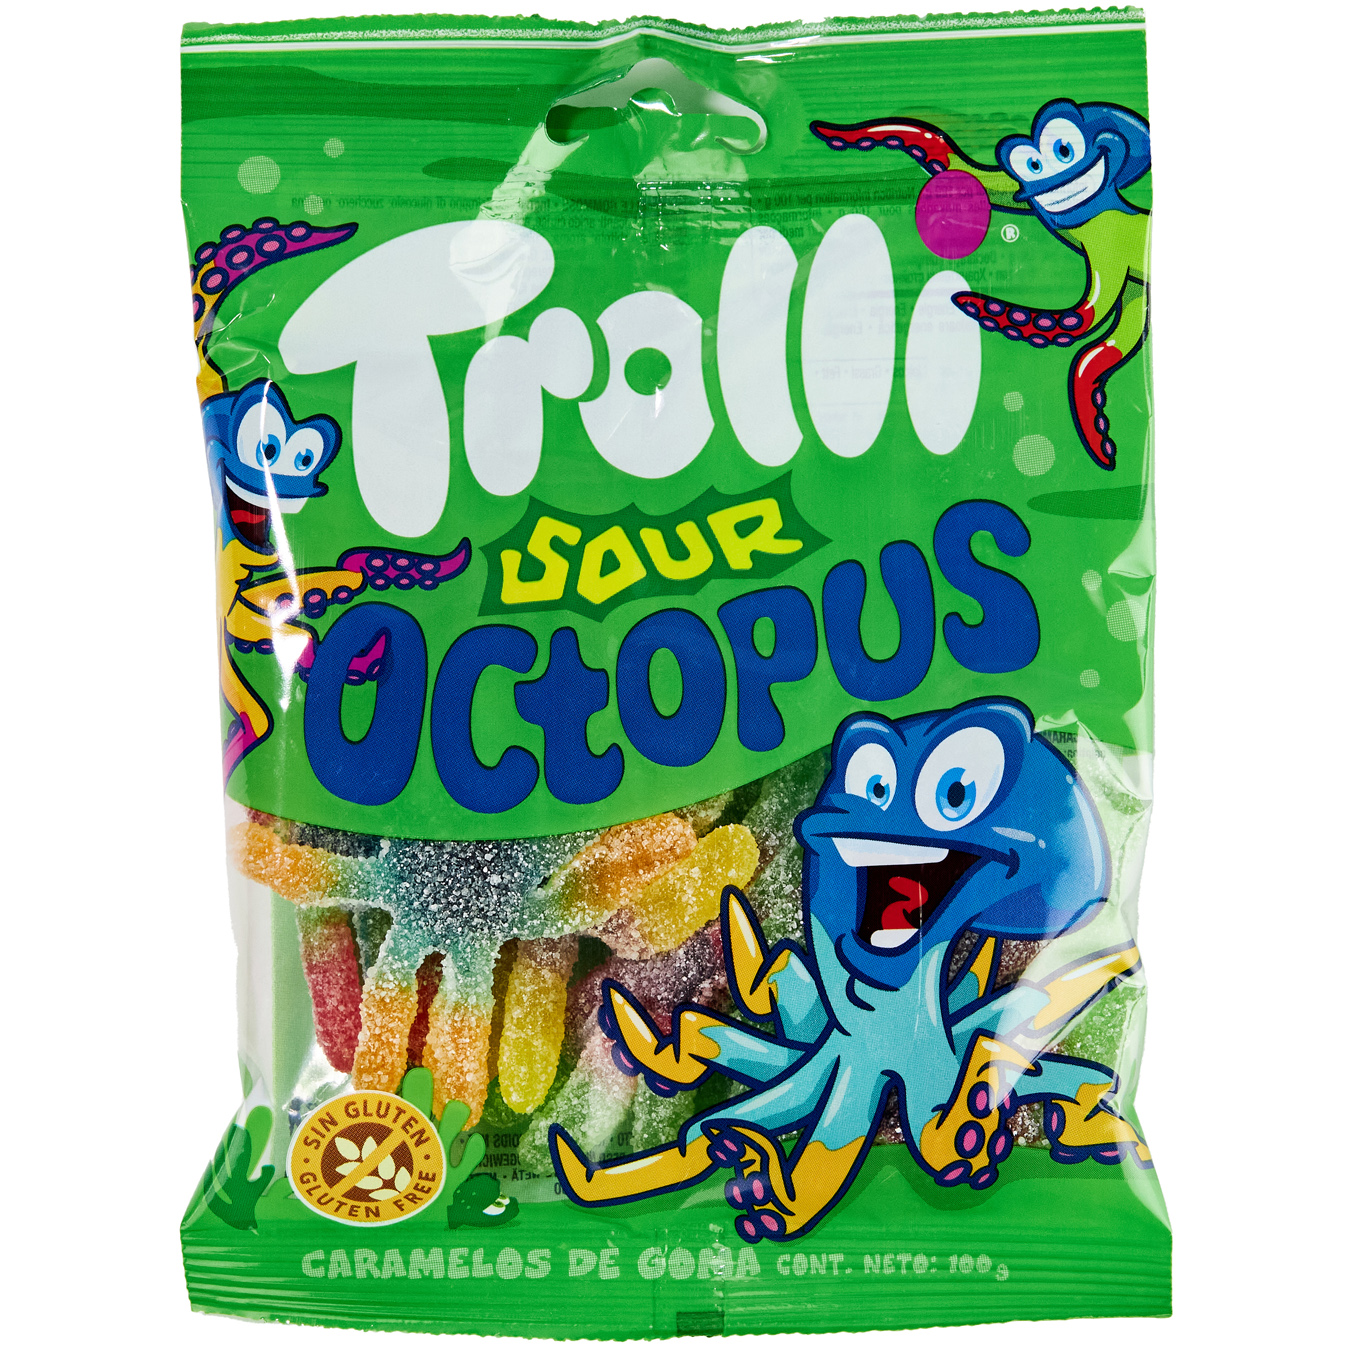 Trolls Sour octopus chewing candies 100g